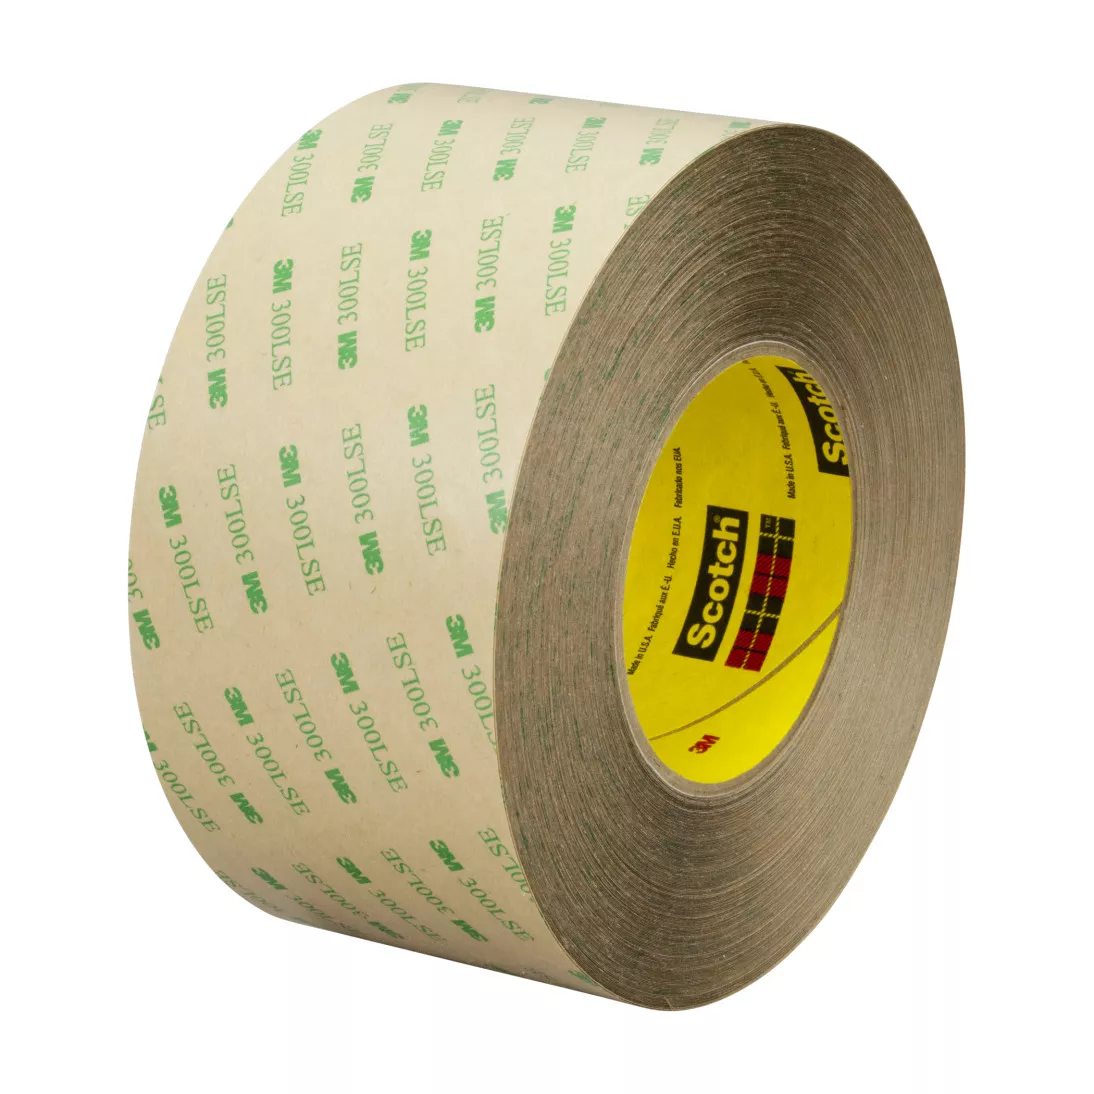 3M™ Double Coated Tape 93015LE, Clear, 54 in x 180 yd, 5.9 mil, 1 roll
per case